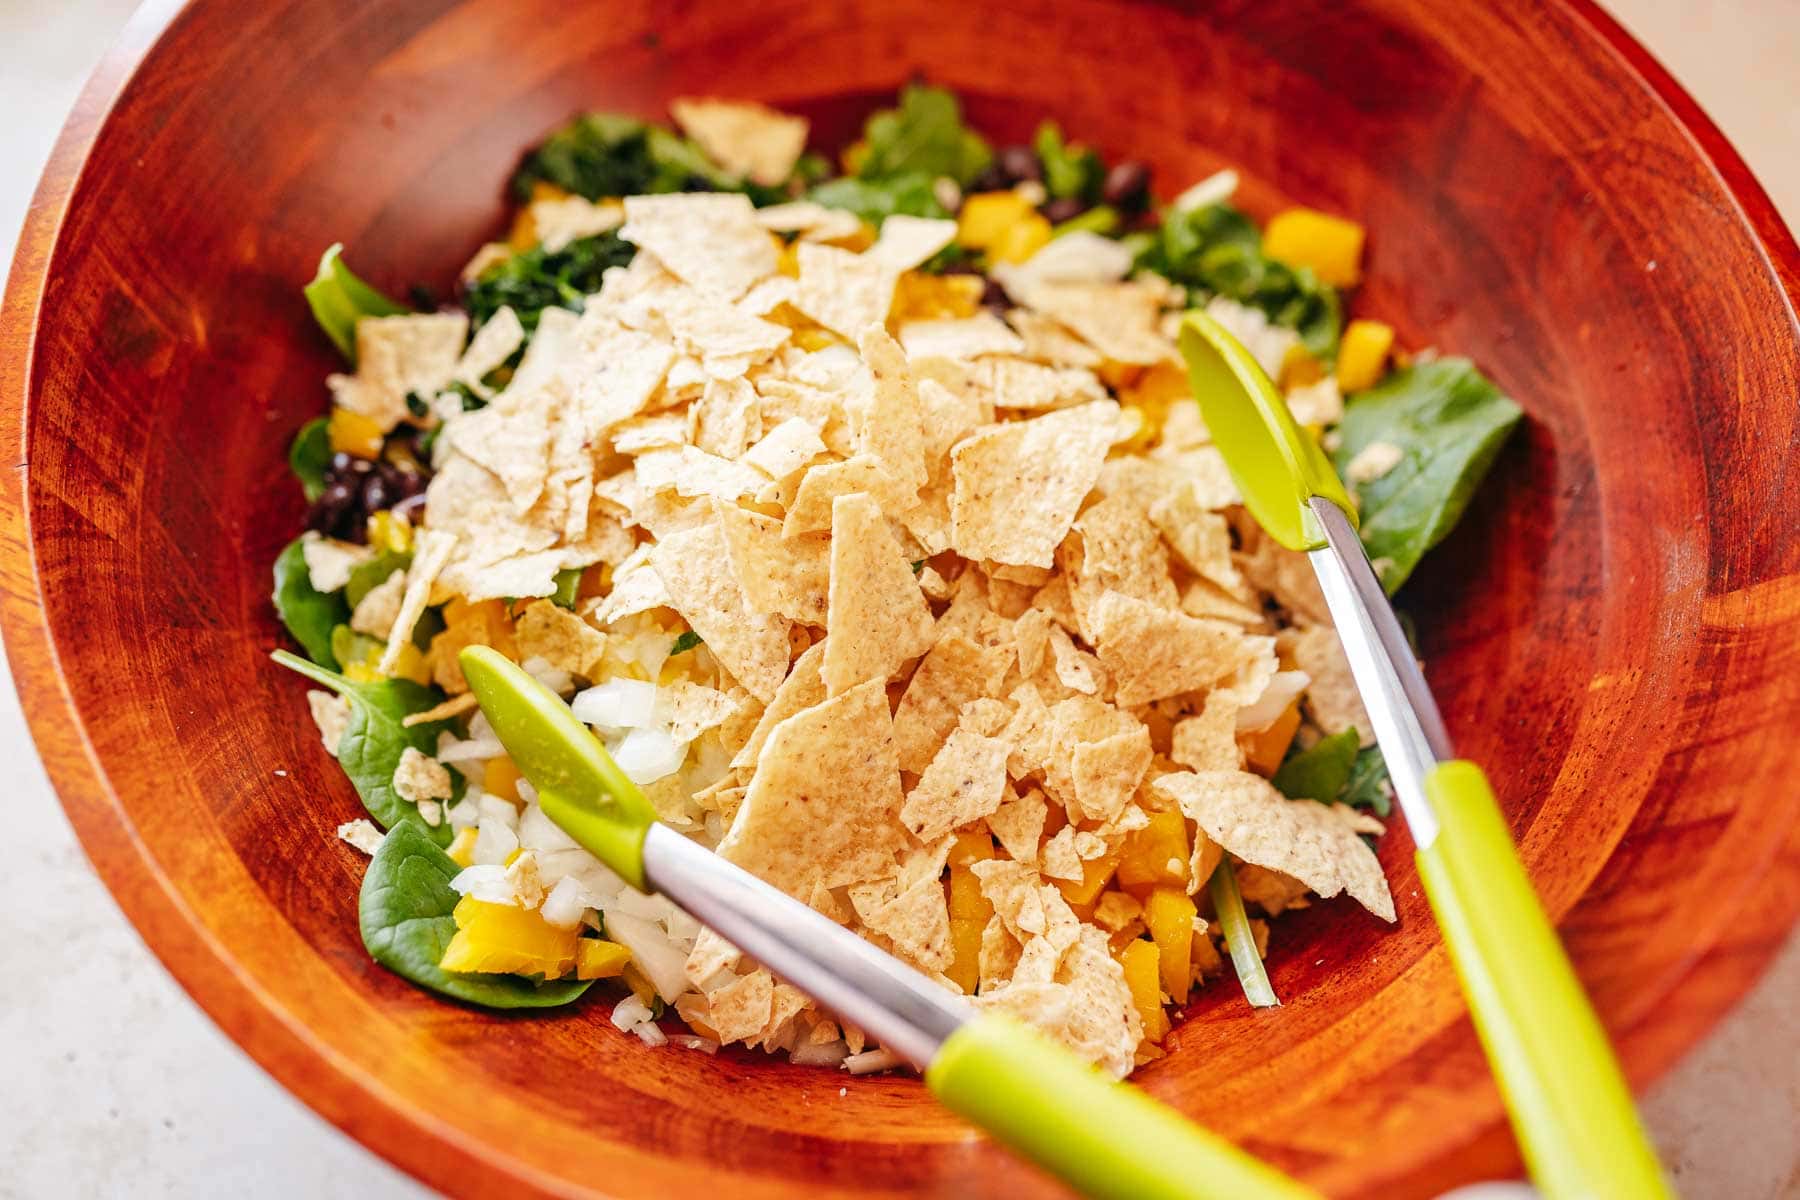 A large salad with various salad ingredients topped with tortilla strips and green tongs.